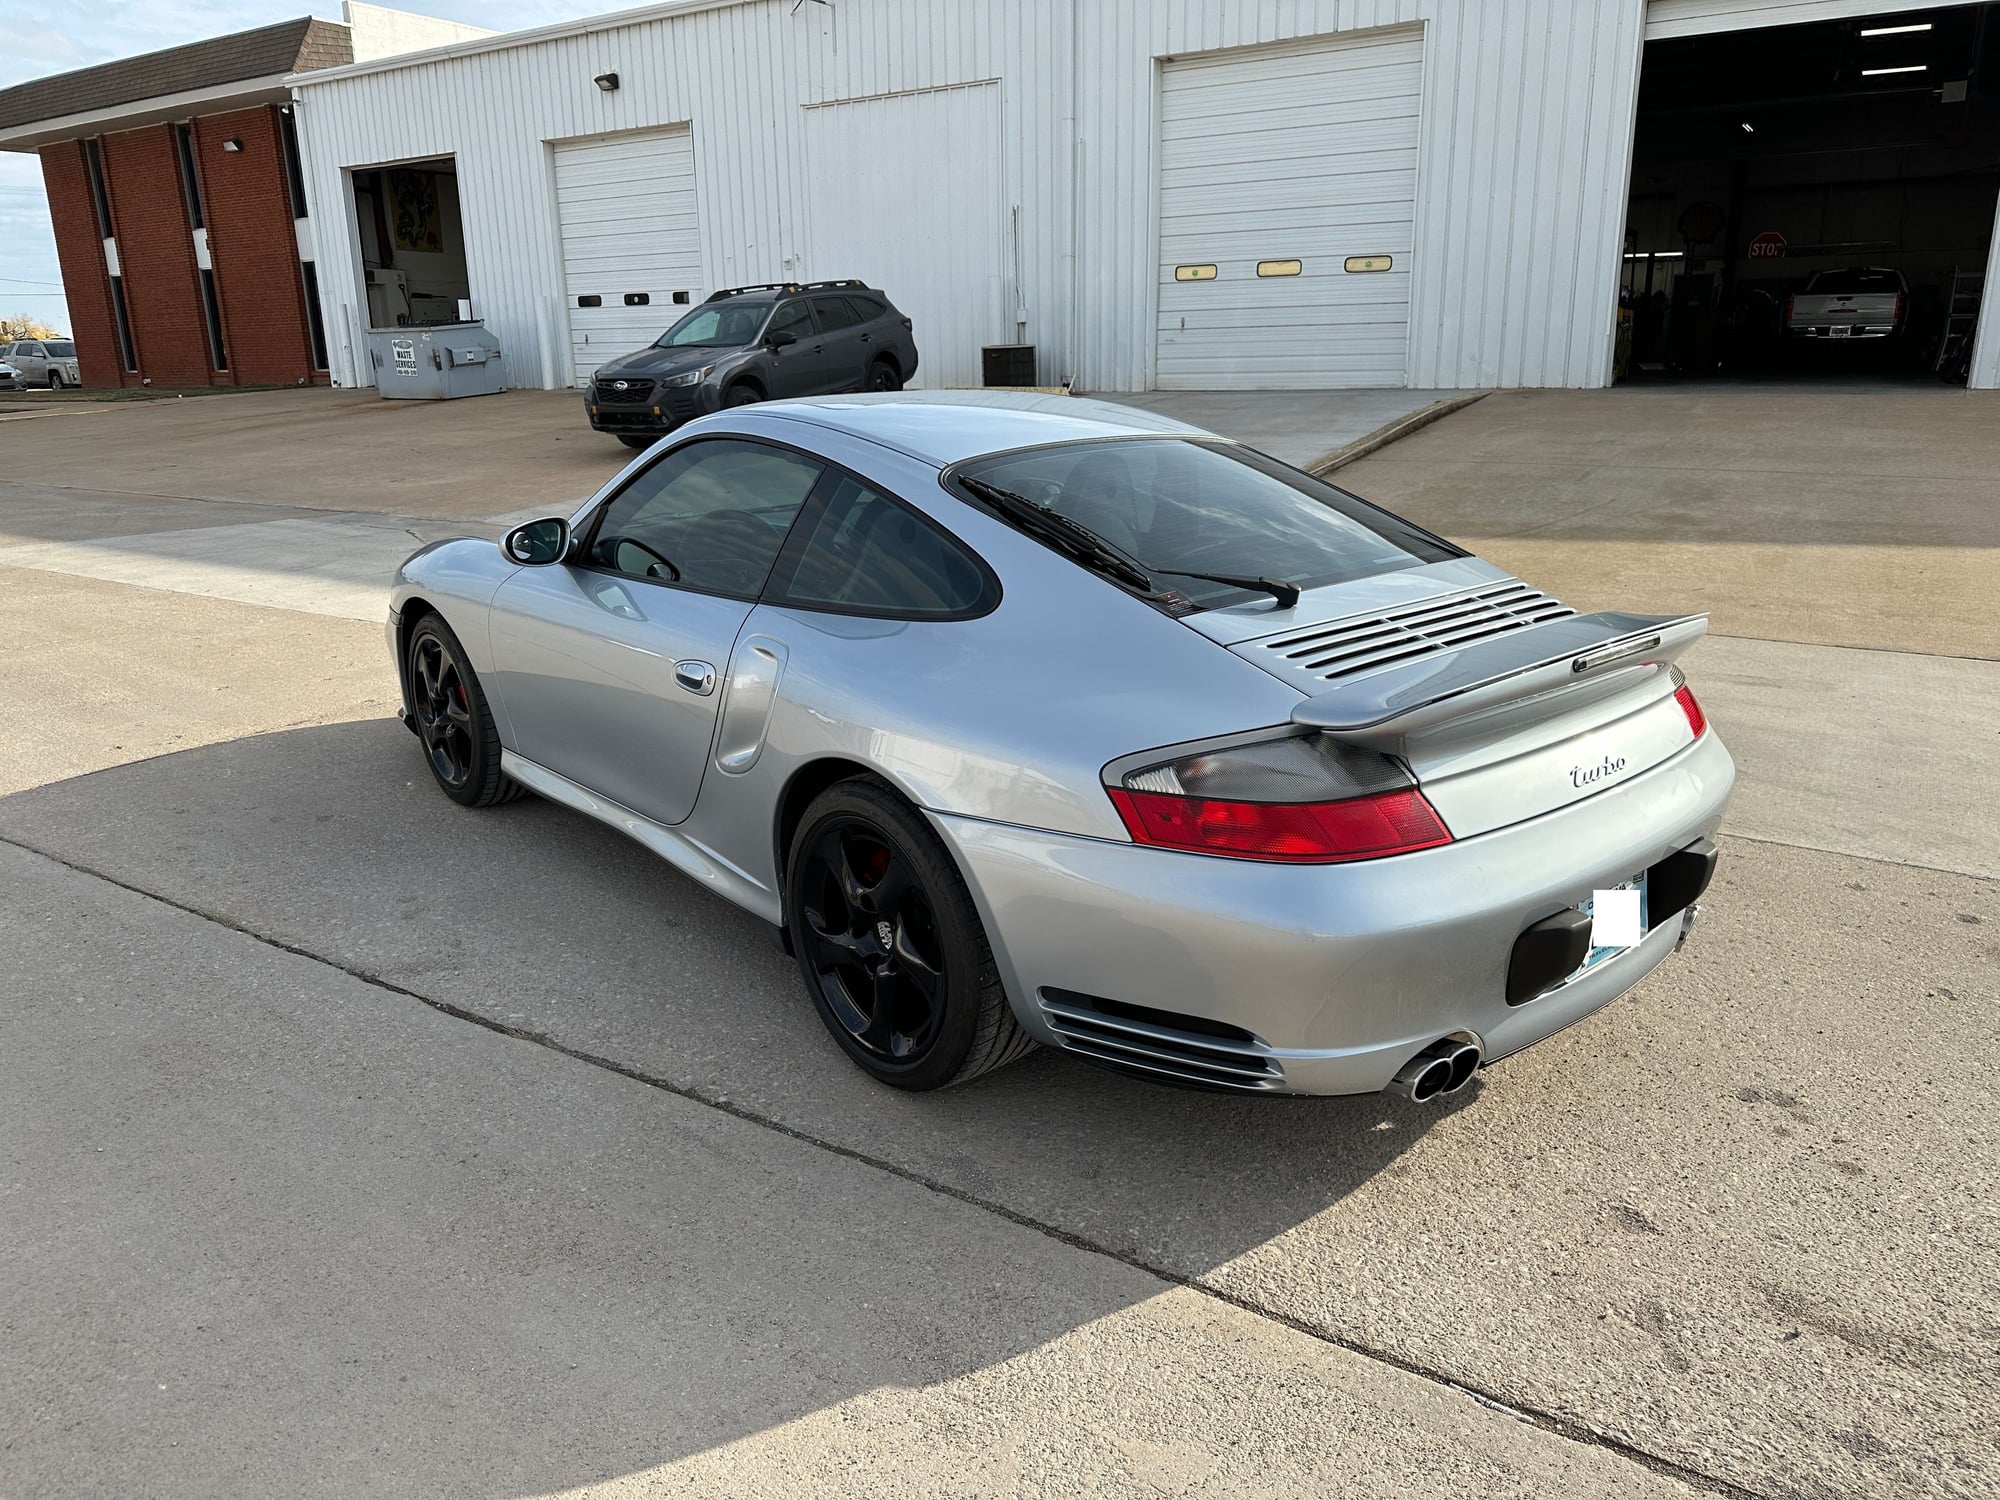 2003 Porsche 911 - 2003 911 996 turbo awd 40,000 miles silver manual - Used - VIN WP0AB29903S686626 - 40,000 Miles - 6 cyl - AWD - Manual - Coupe - Silver - Oklahoma City, OK 73107, United States